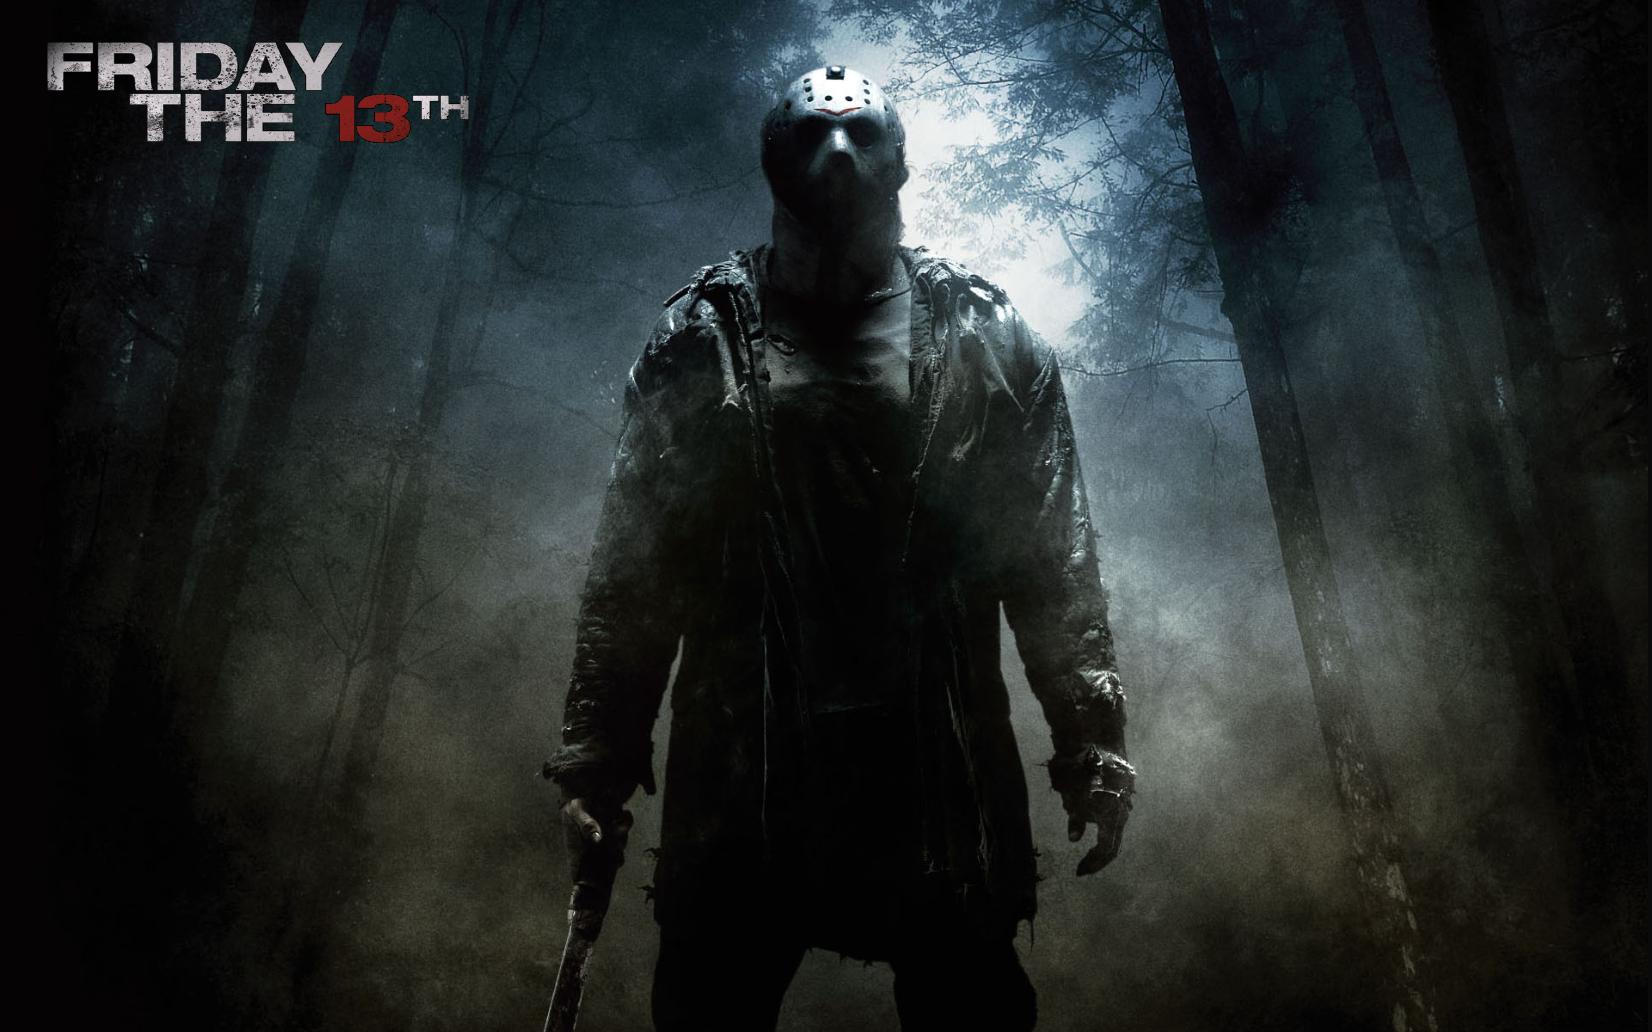 Is It Any Good? Friday the 13th (2009)